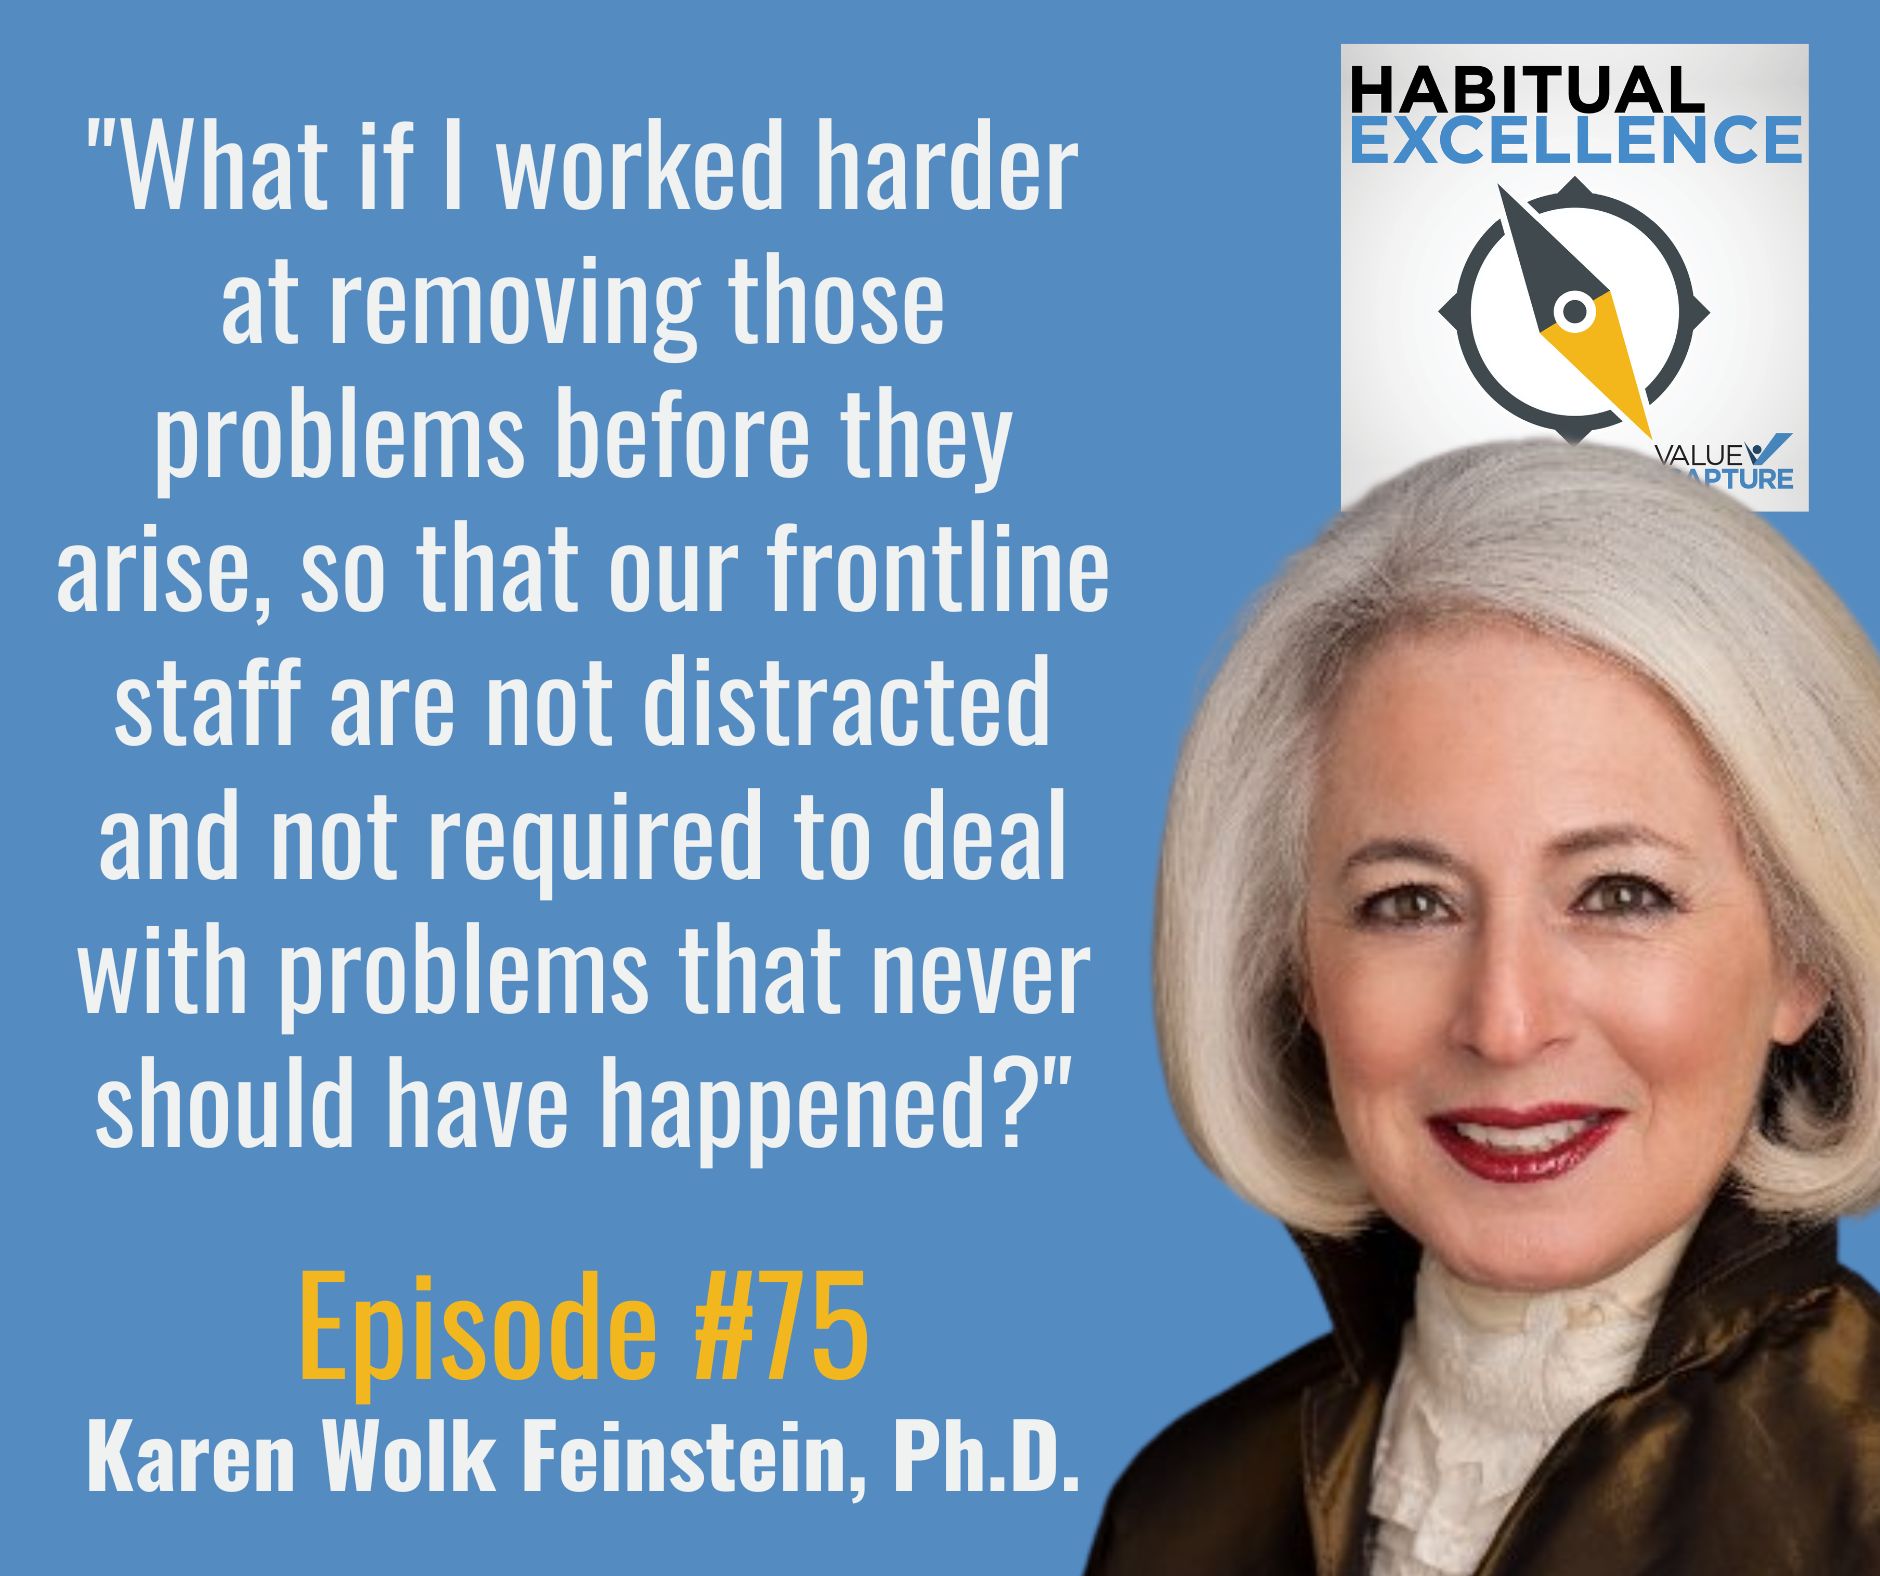 "What if I worked harder at removing those problems before they arise, so that our frontline staff are not distracted and not required to deal with problems that never should have happened?" - Karen Wolk Feinstein